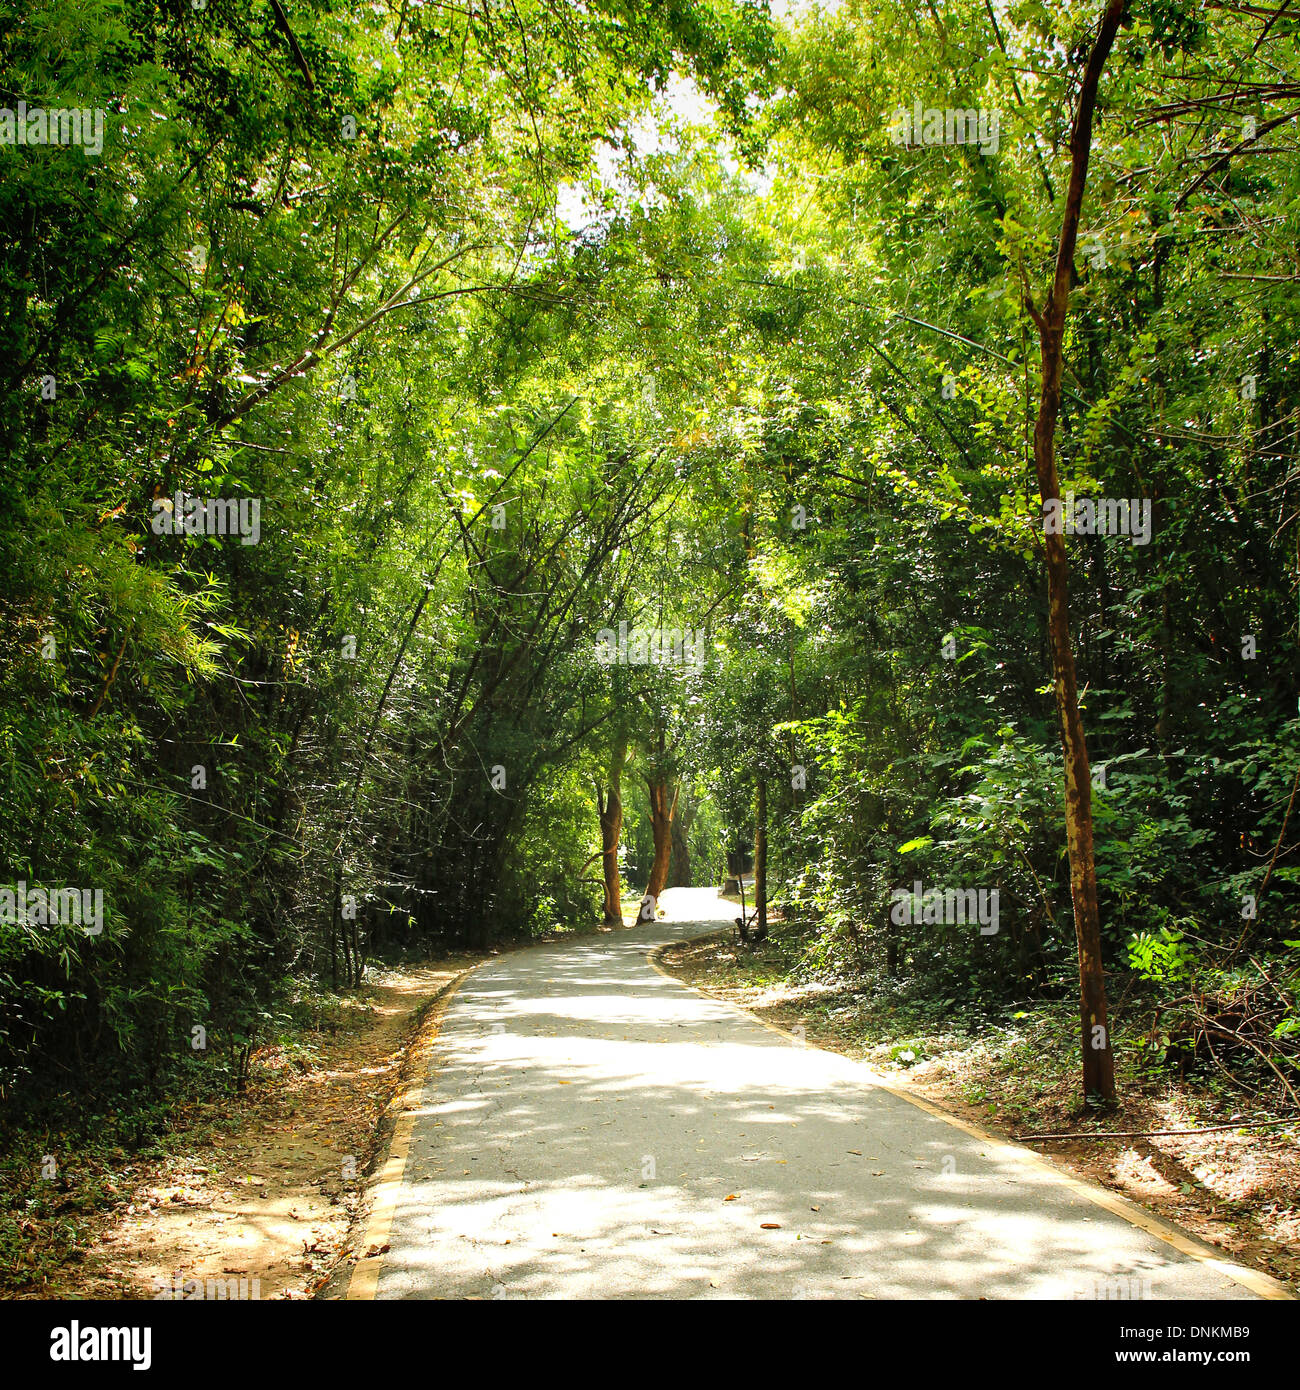 Green forest with pathway Stock Photo